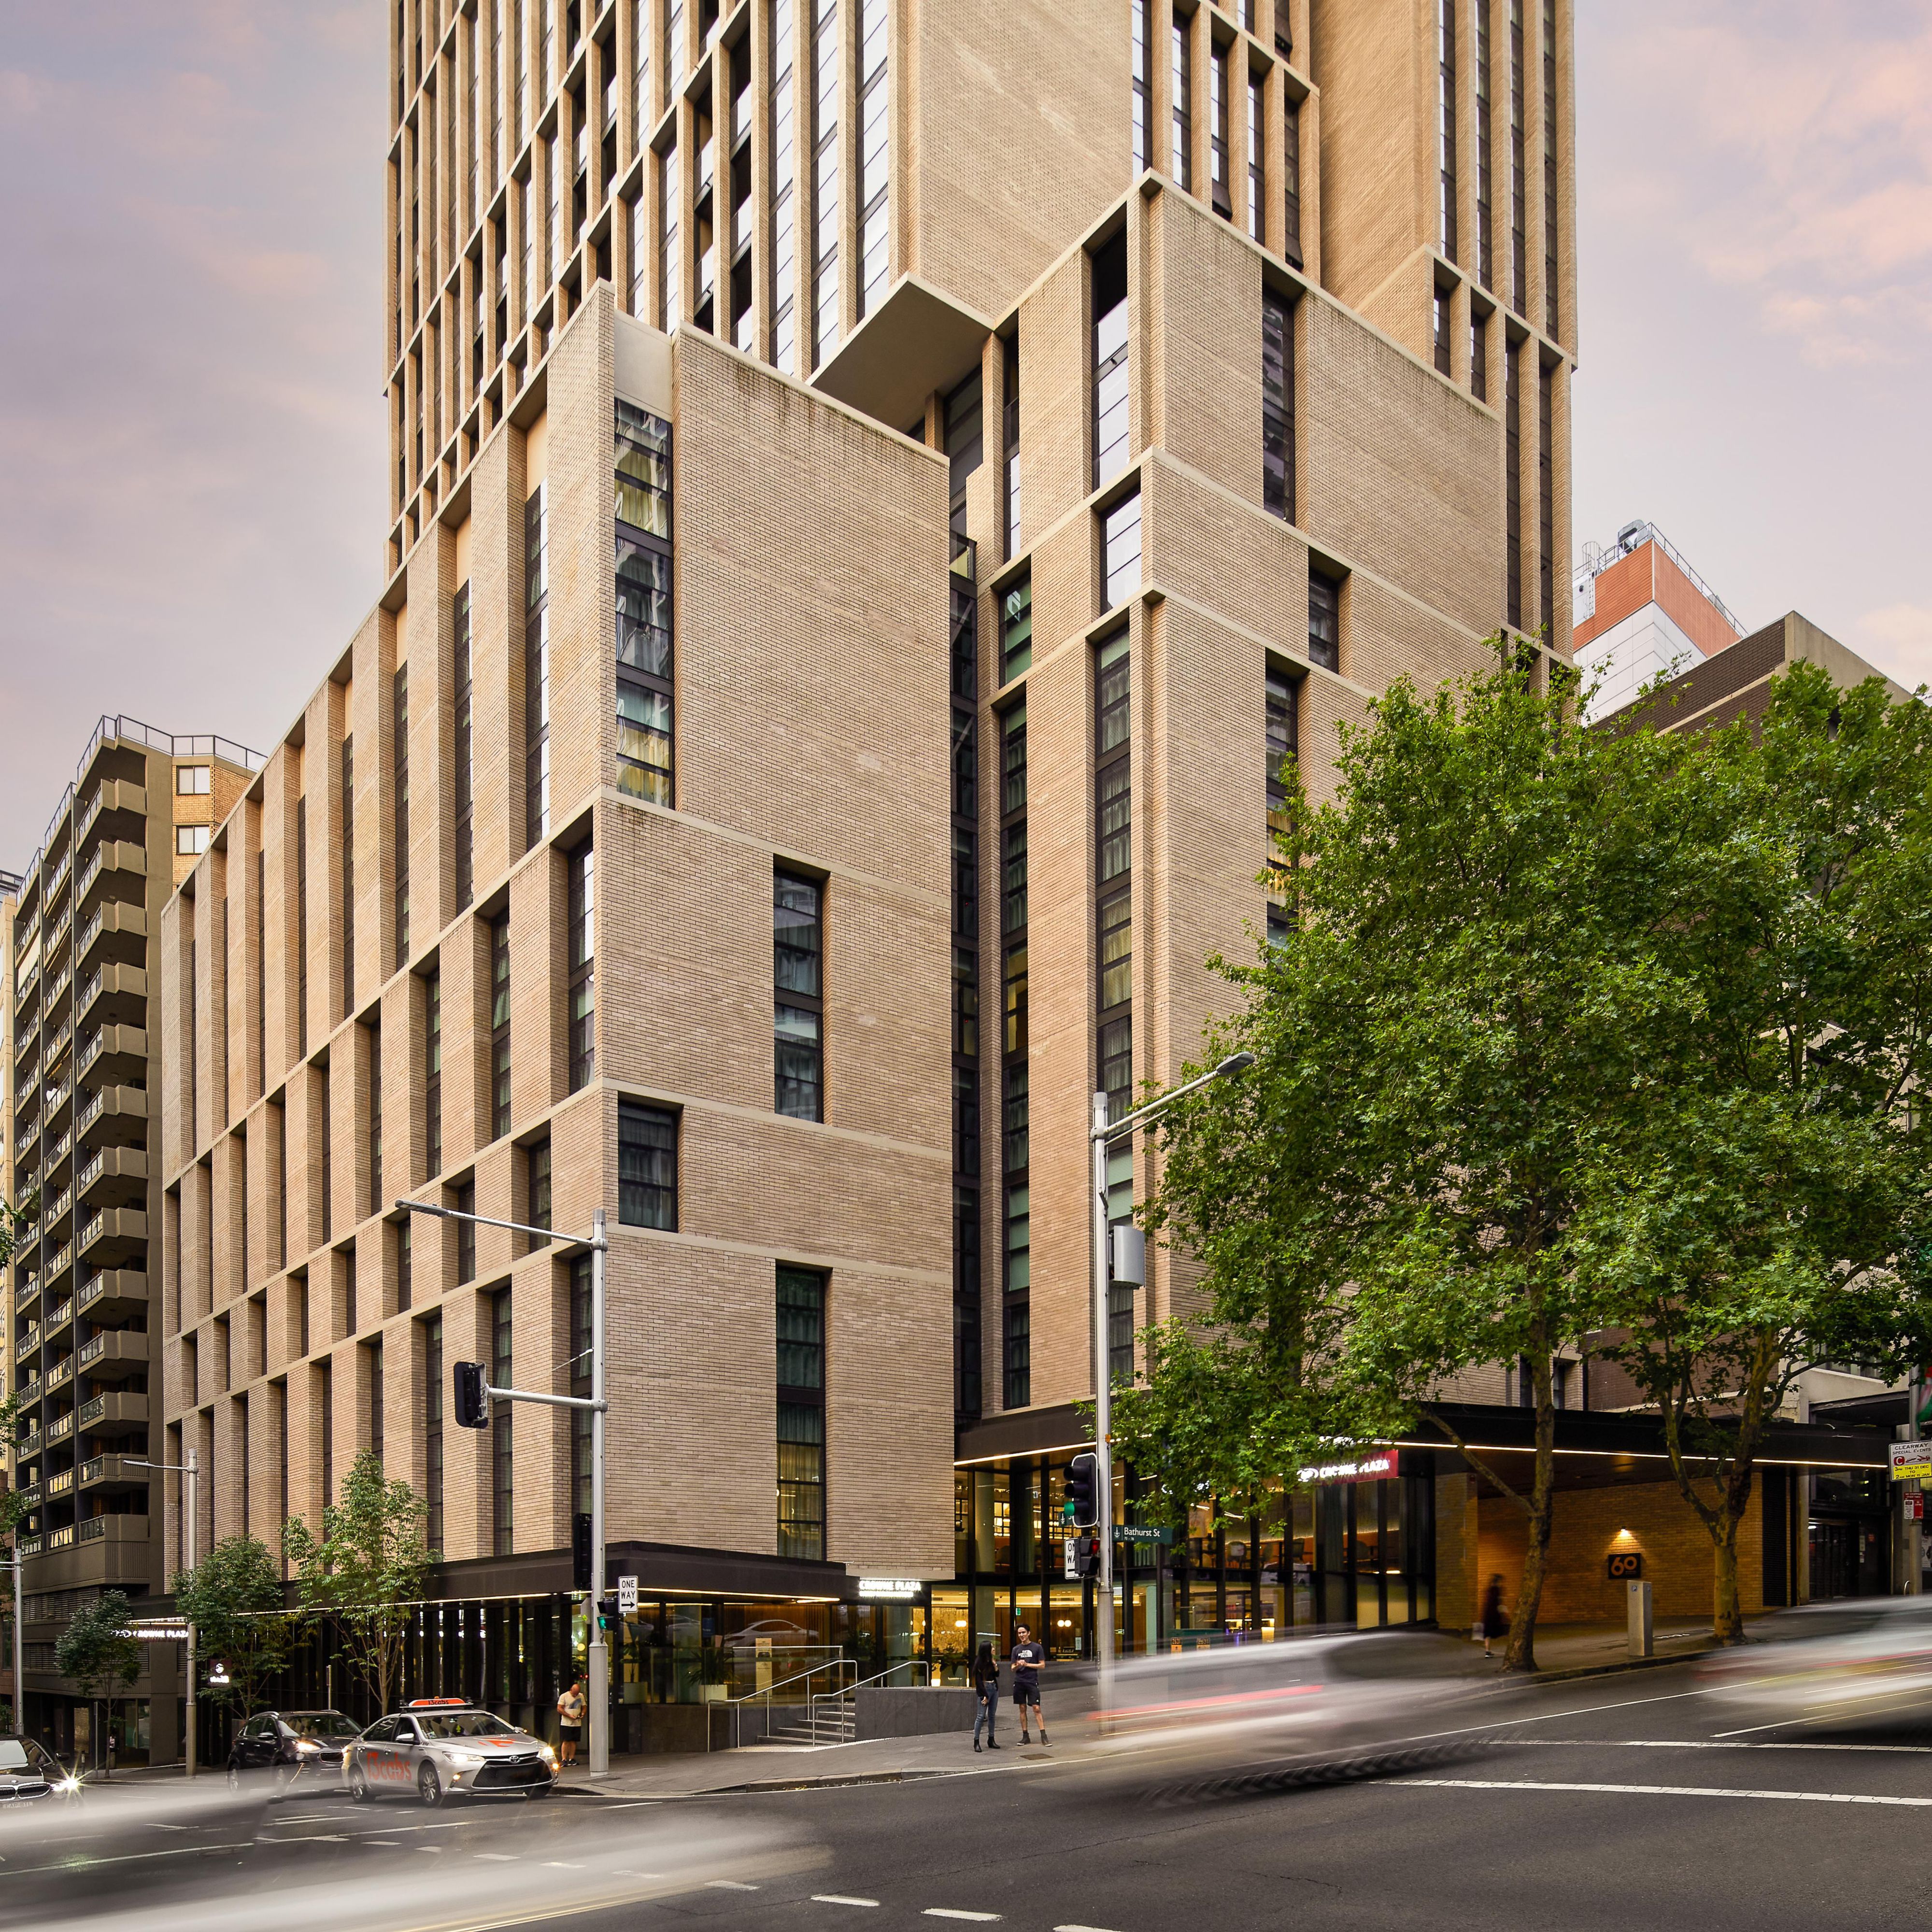 Crowne Plaza Sydney Darling Harbour located in the heart of Sydney